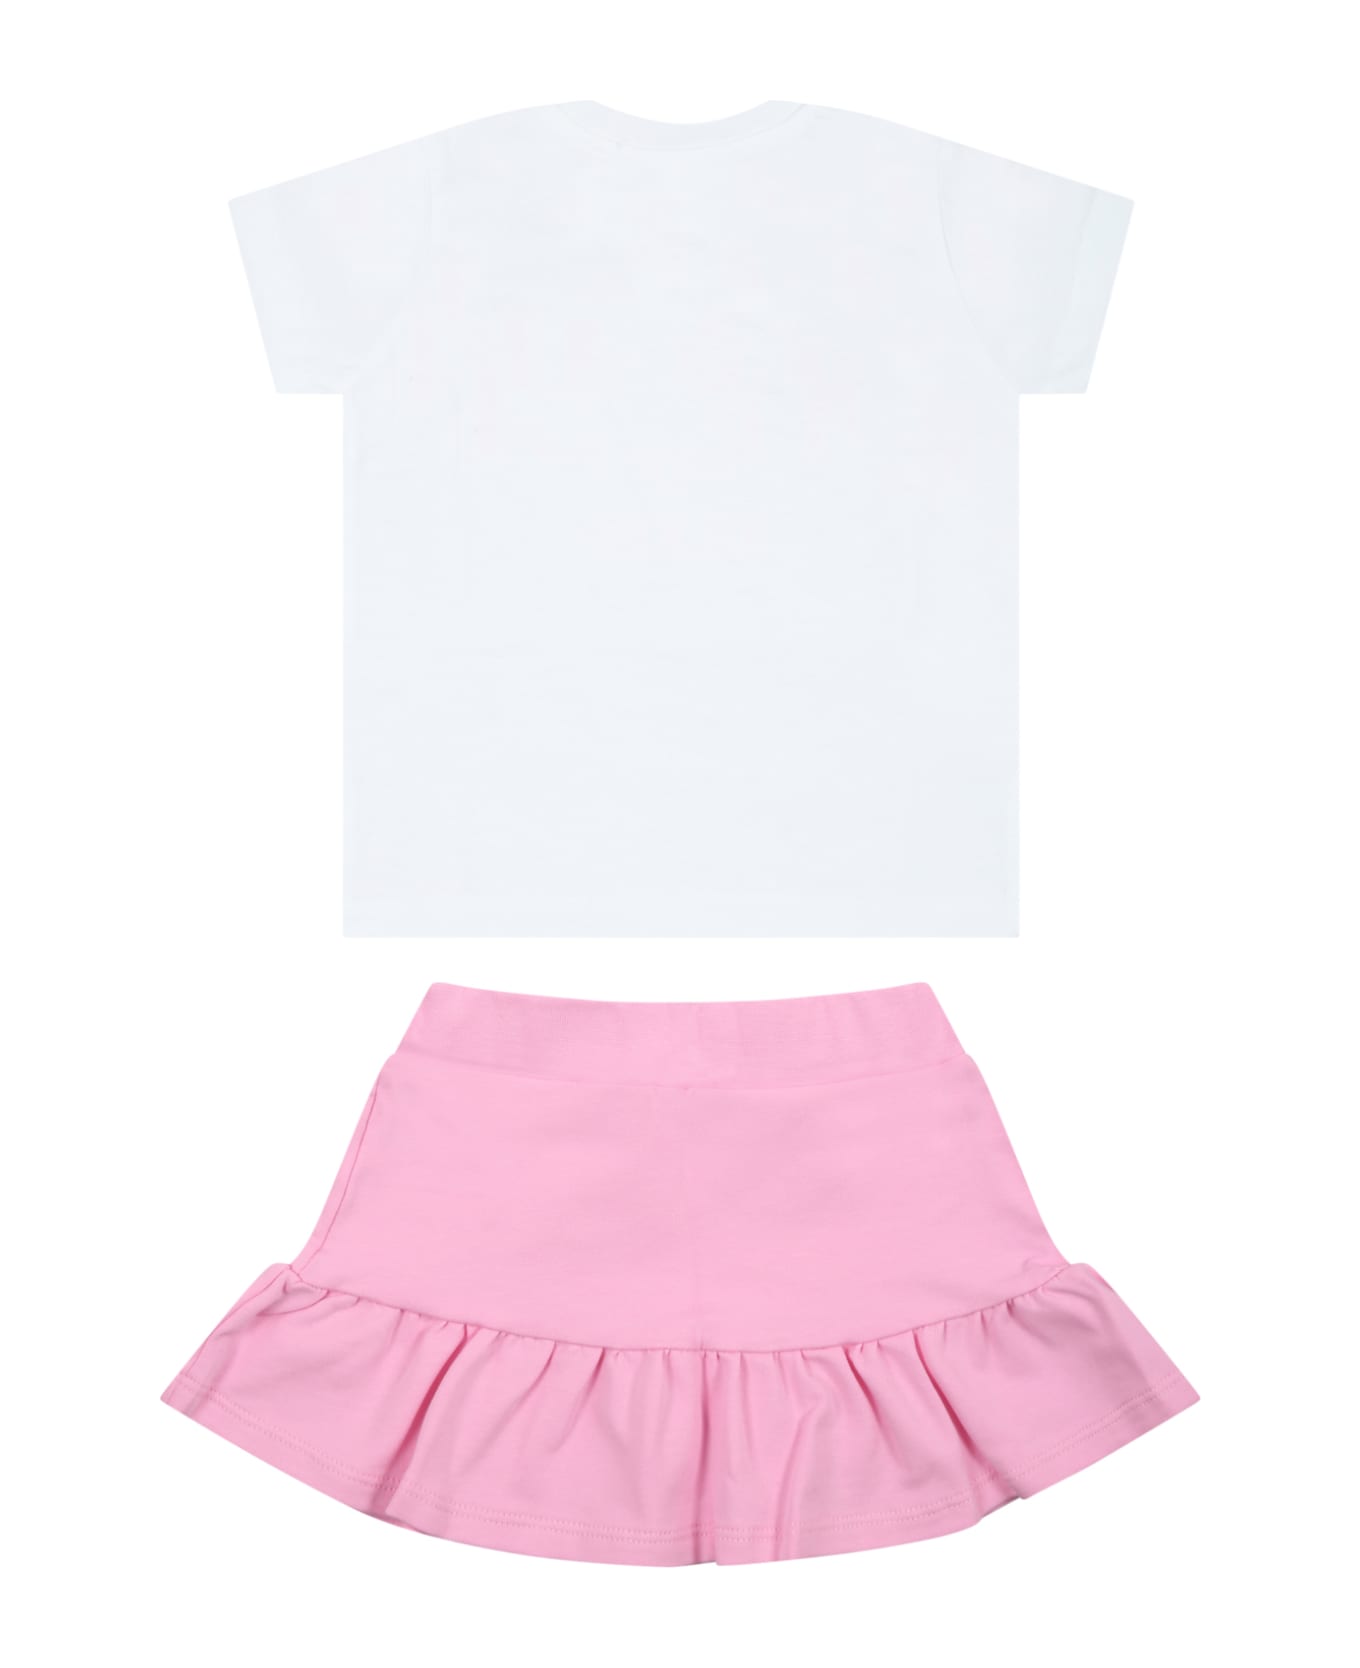 MSGM Multicolor Set For Baby Girl With Logo - Multicolor